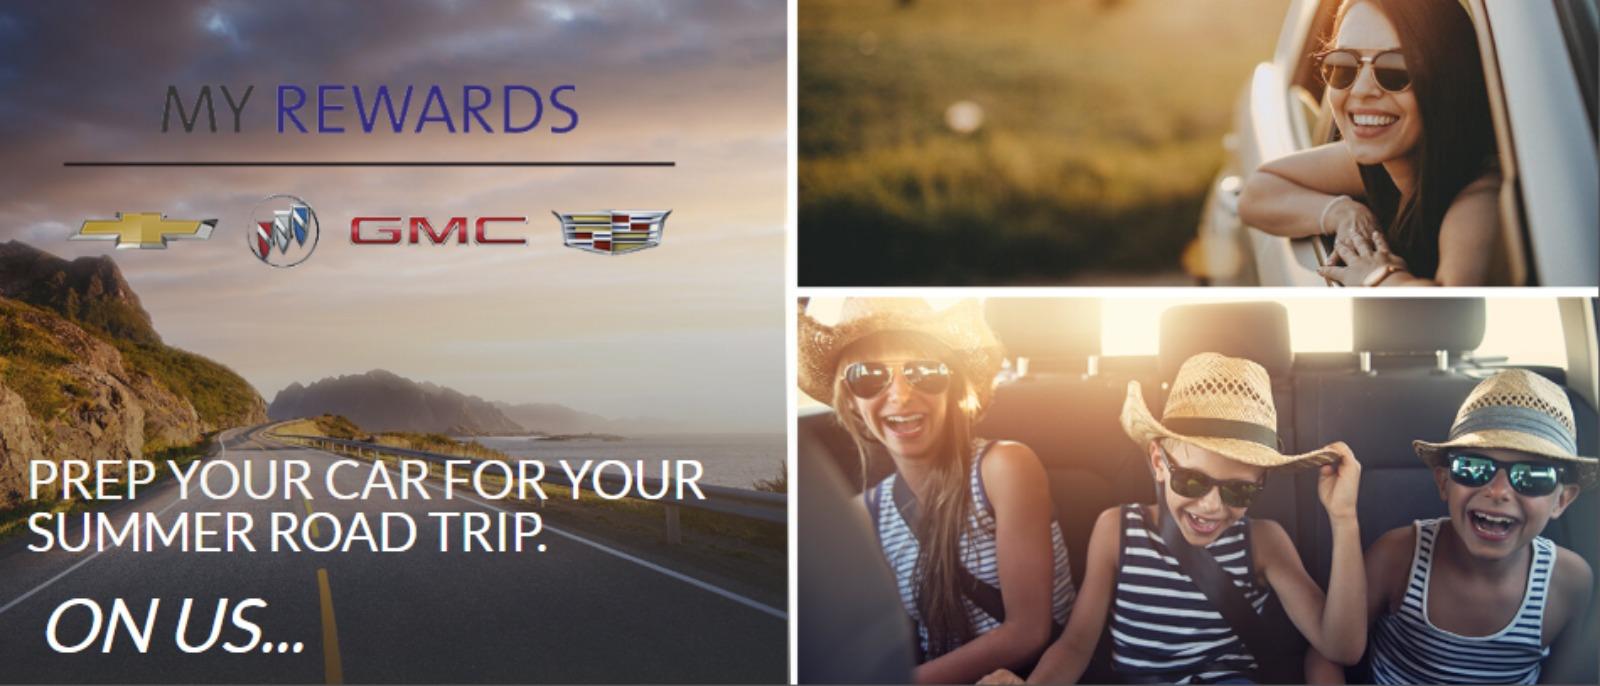 My Rewards prep your car for your summer road trip.
ON US...